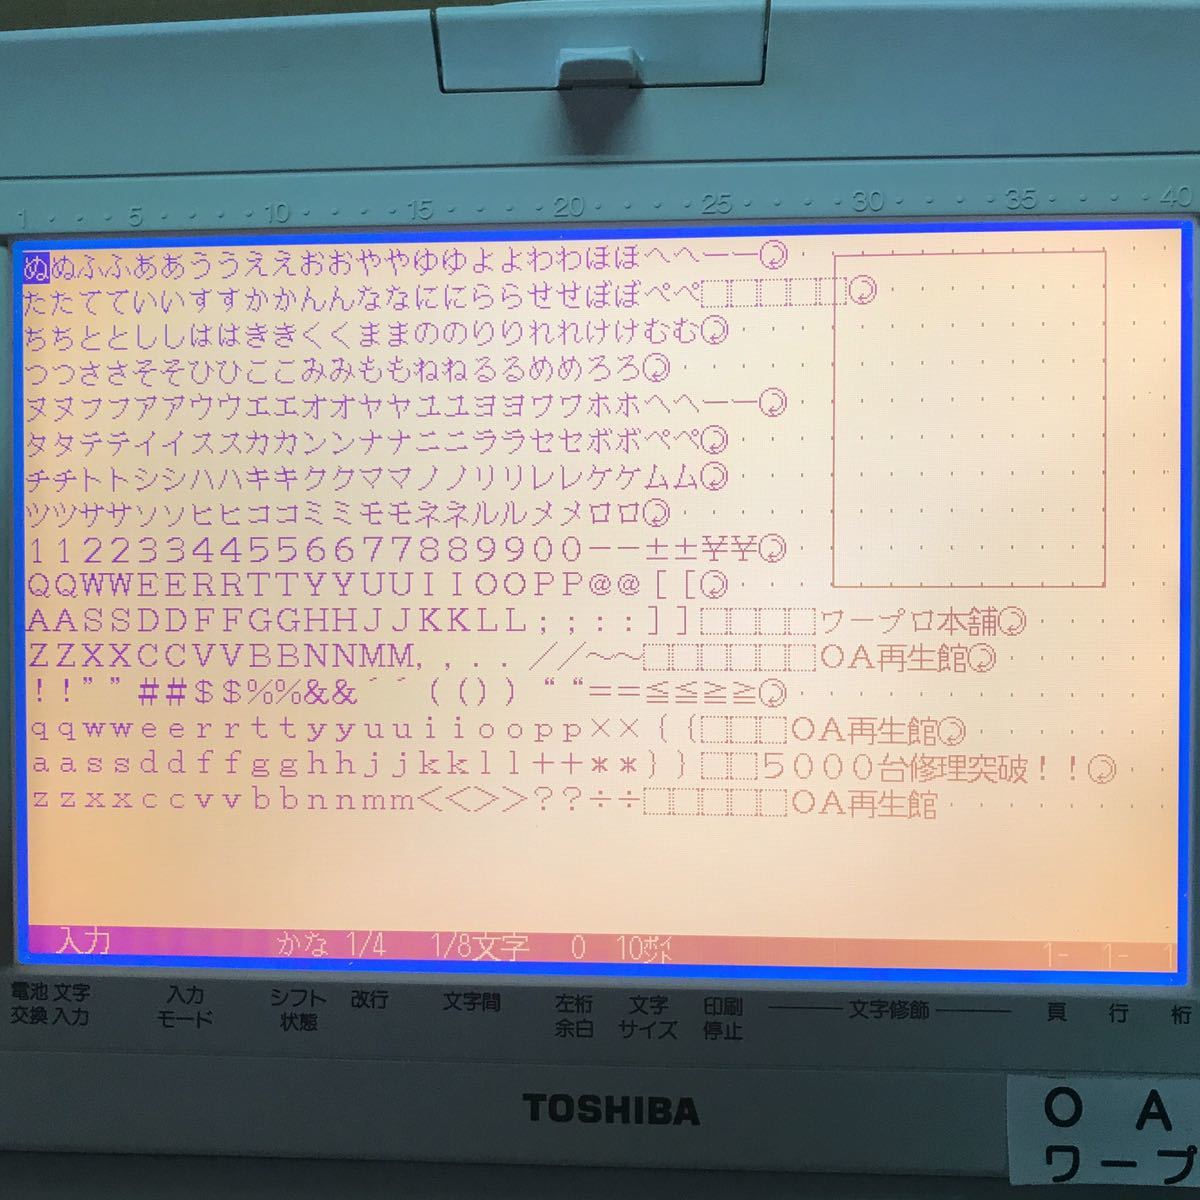  Toshiba word-processor JW-4020 service being completed 3 months guarantee equipped 